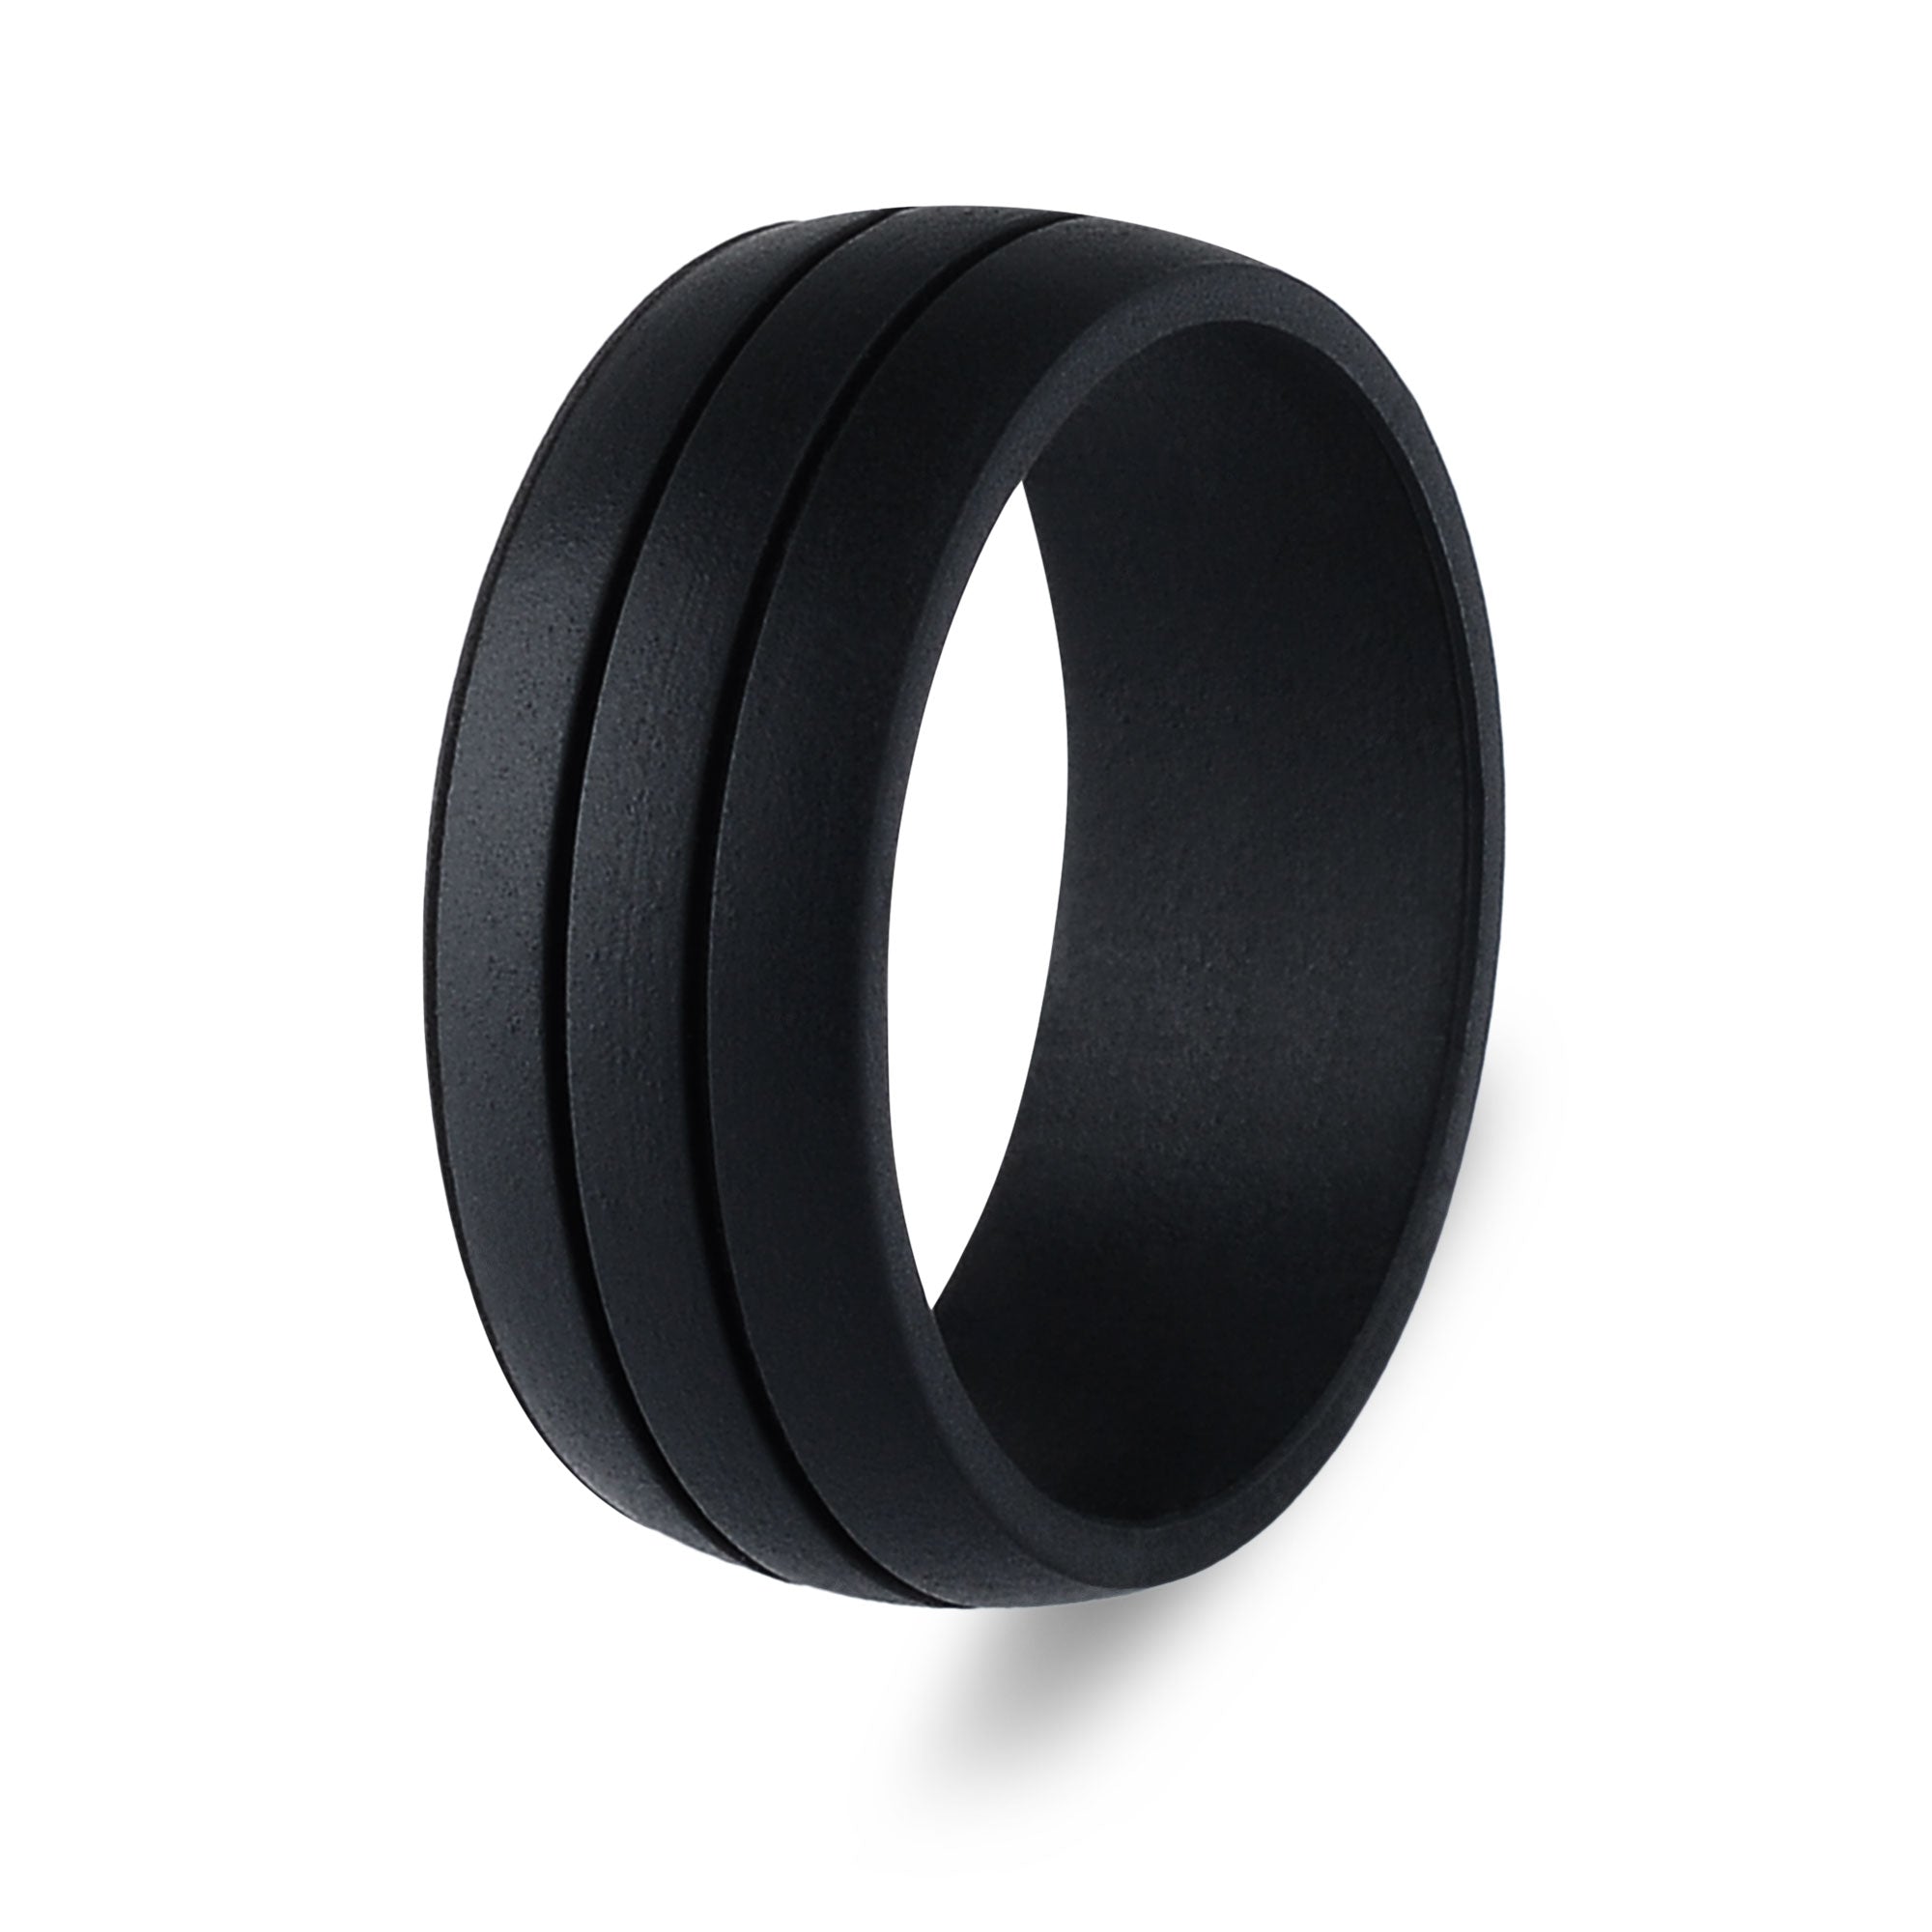 The Jet Black - Silicone Ring